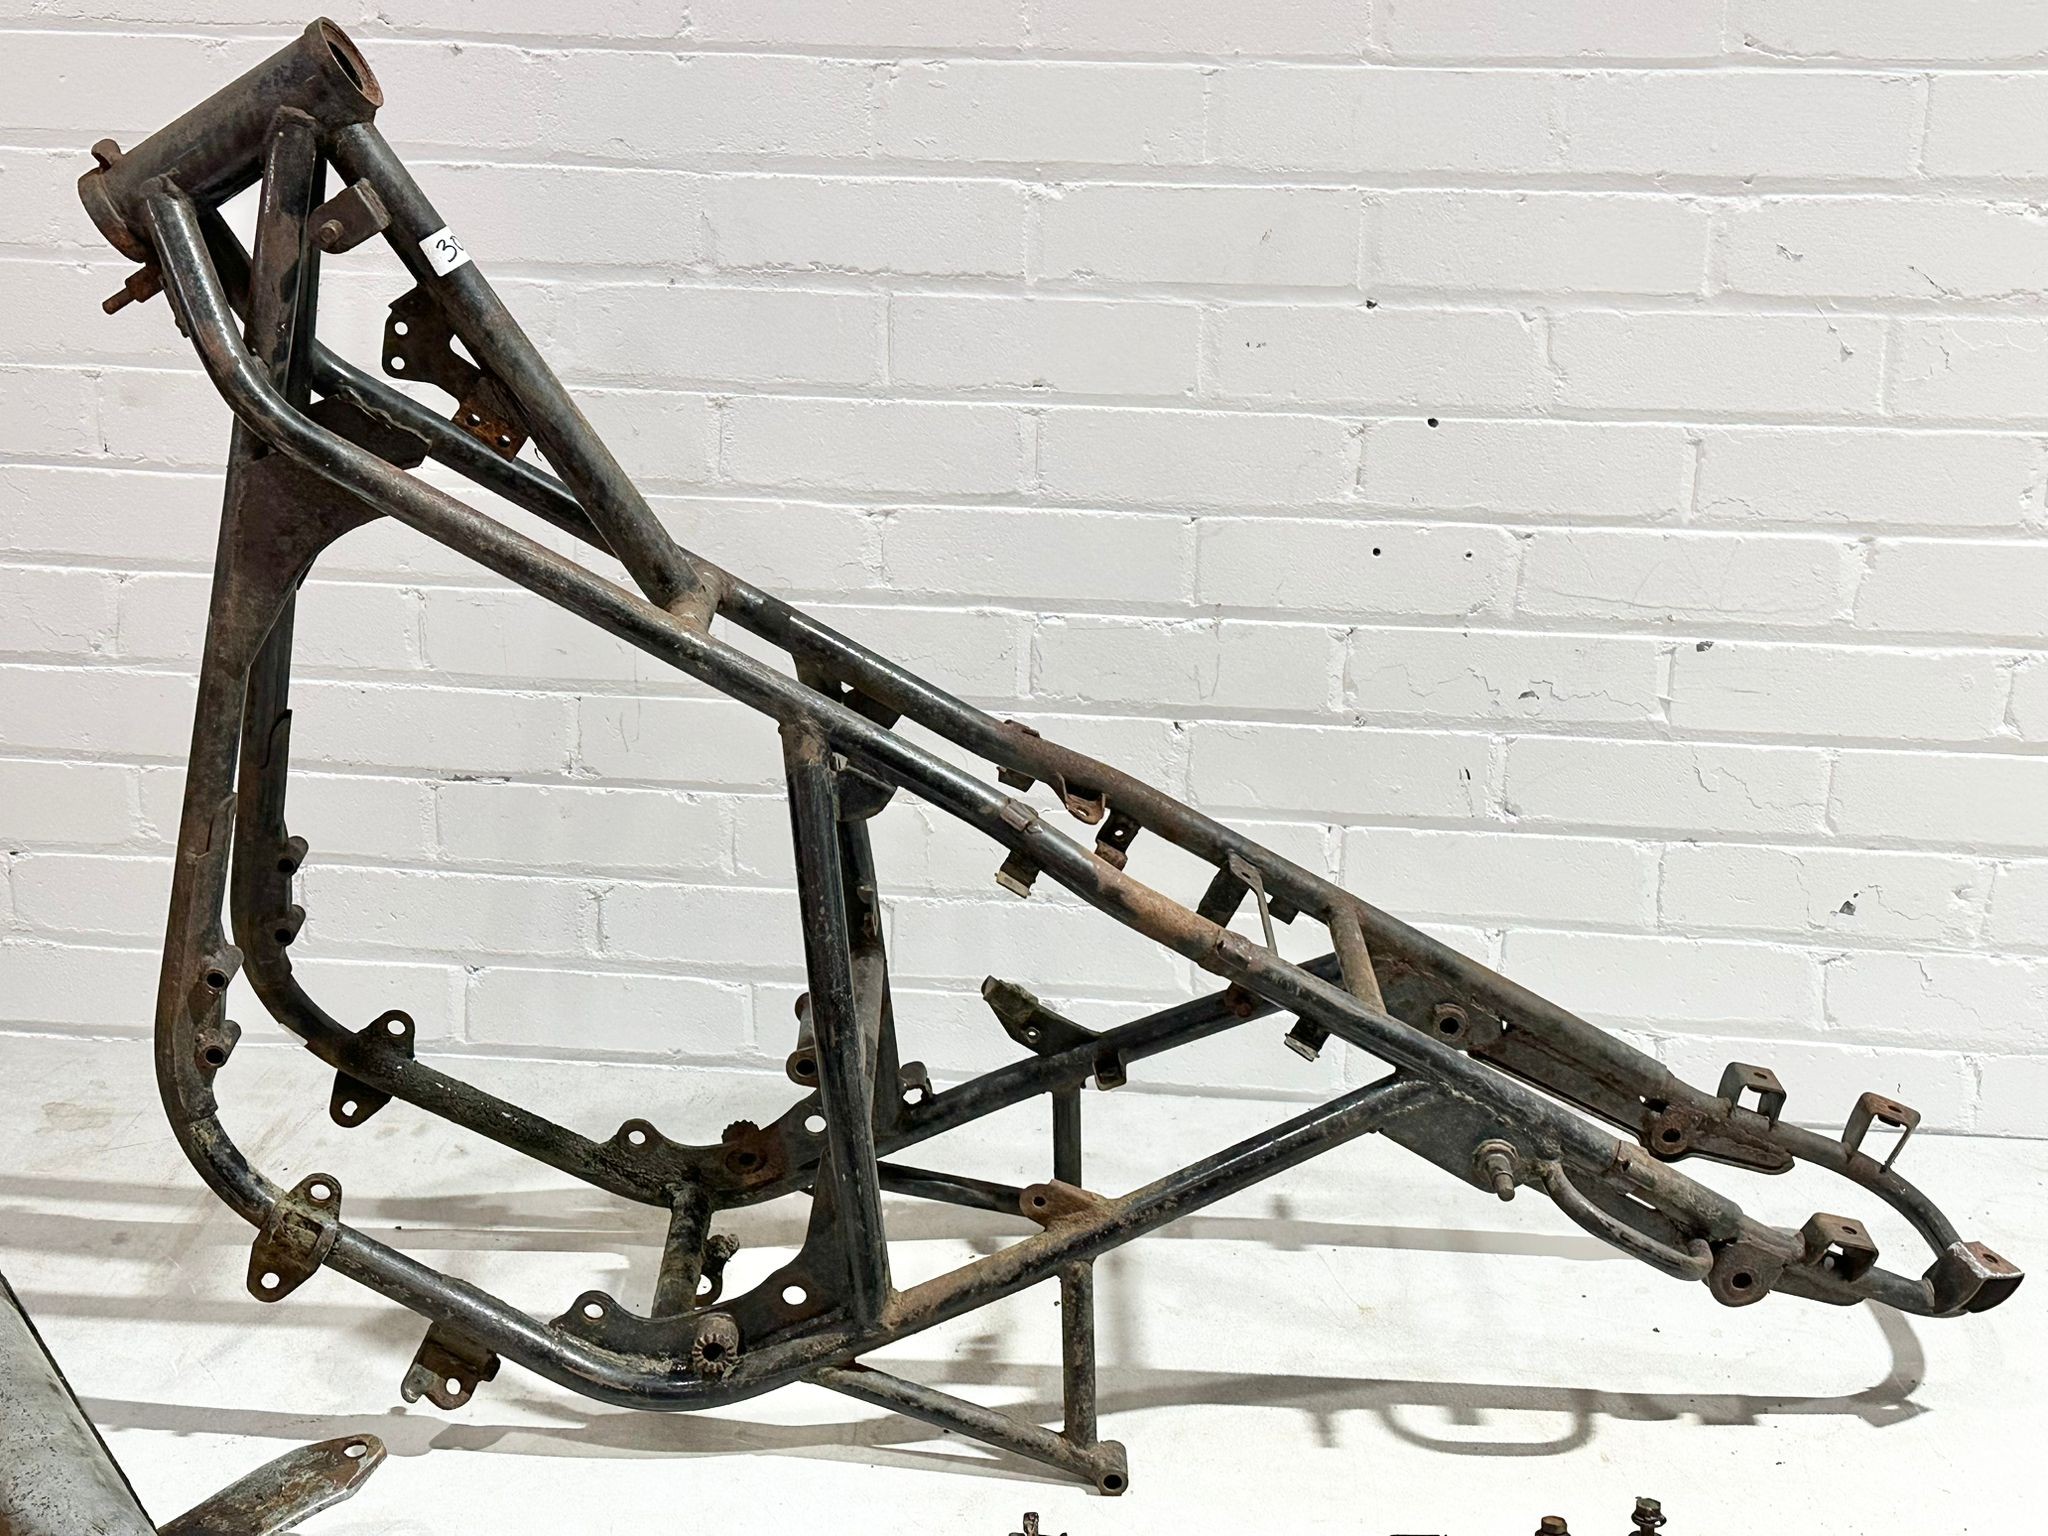 Kawasaki S2 350 frame with tank, seat, forks etc - Image 6 of 12